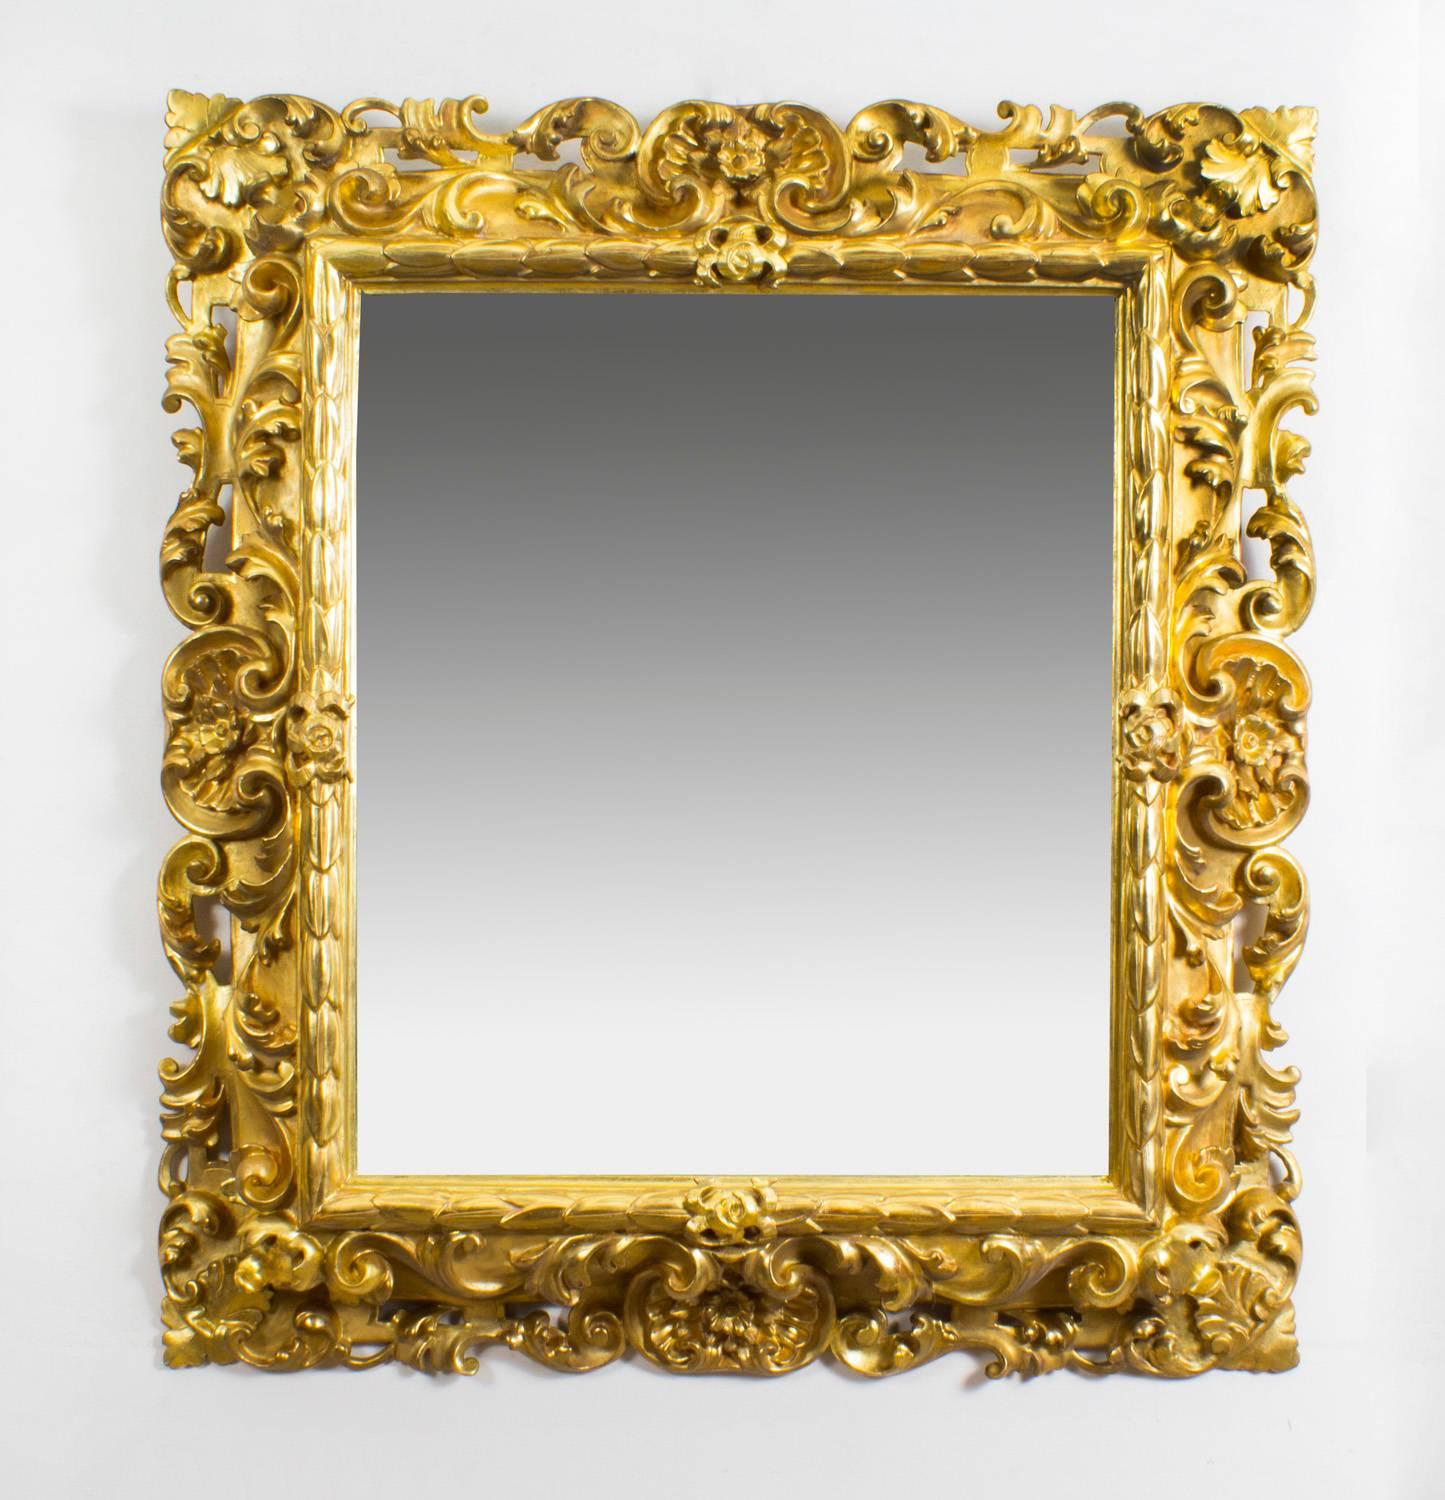 This is a superb pair of antique Italian Florentine giltwood mirrors, circa 1870 in date. 
The rectangular mirrors plates are within a boldly-carved scrolling acanthus frame, with a beaded inner border.

Florentine style refers to the art and